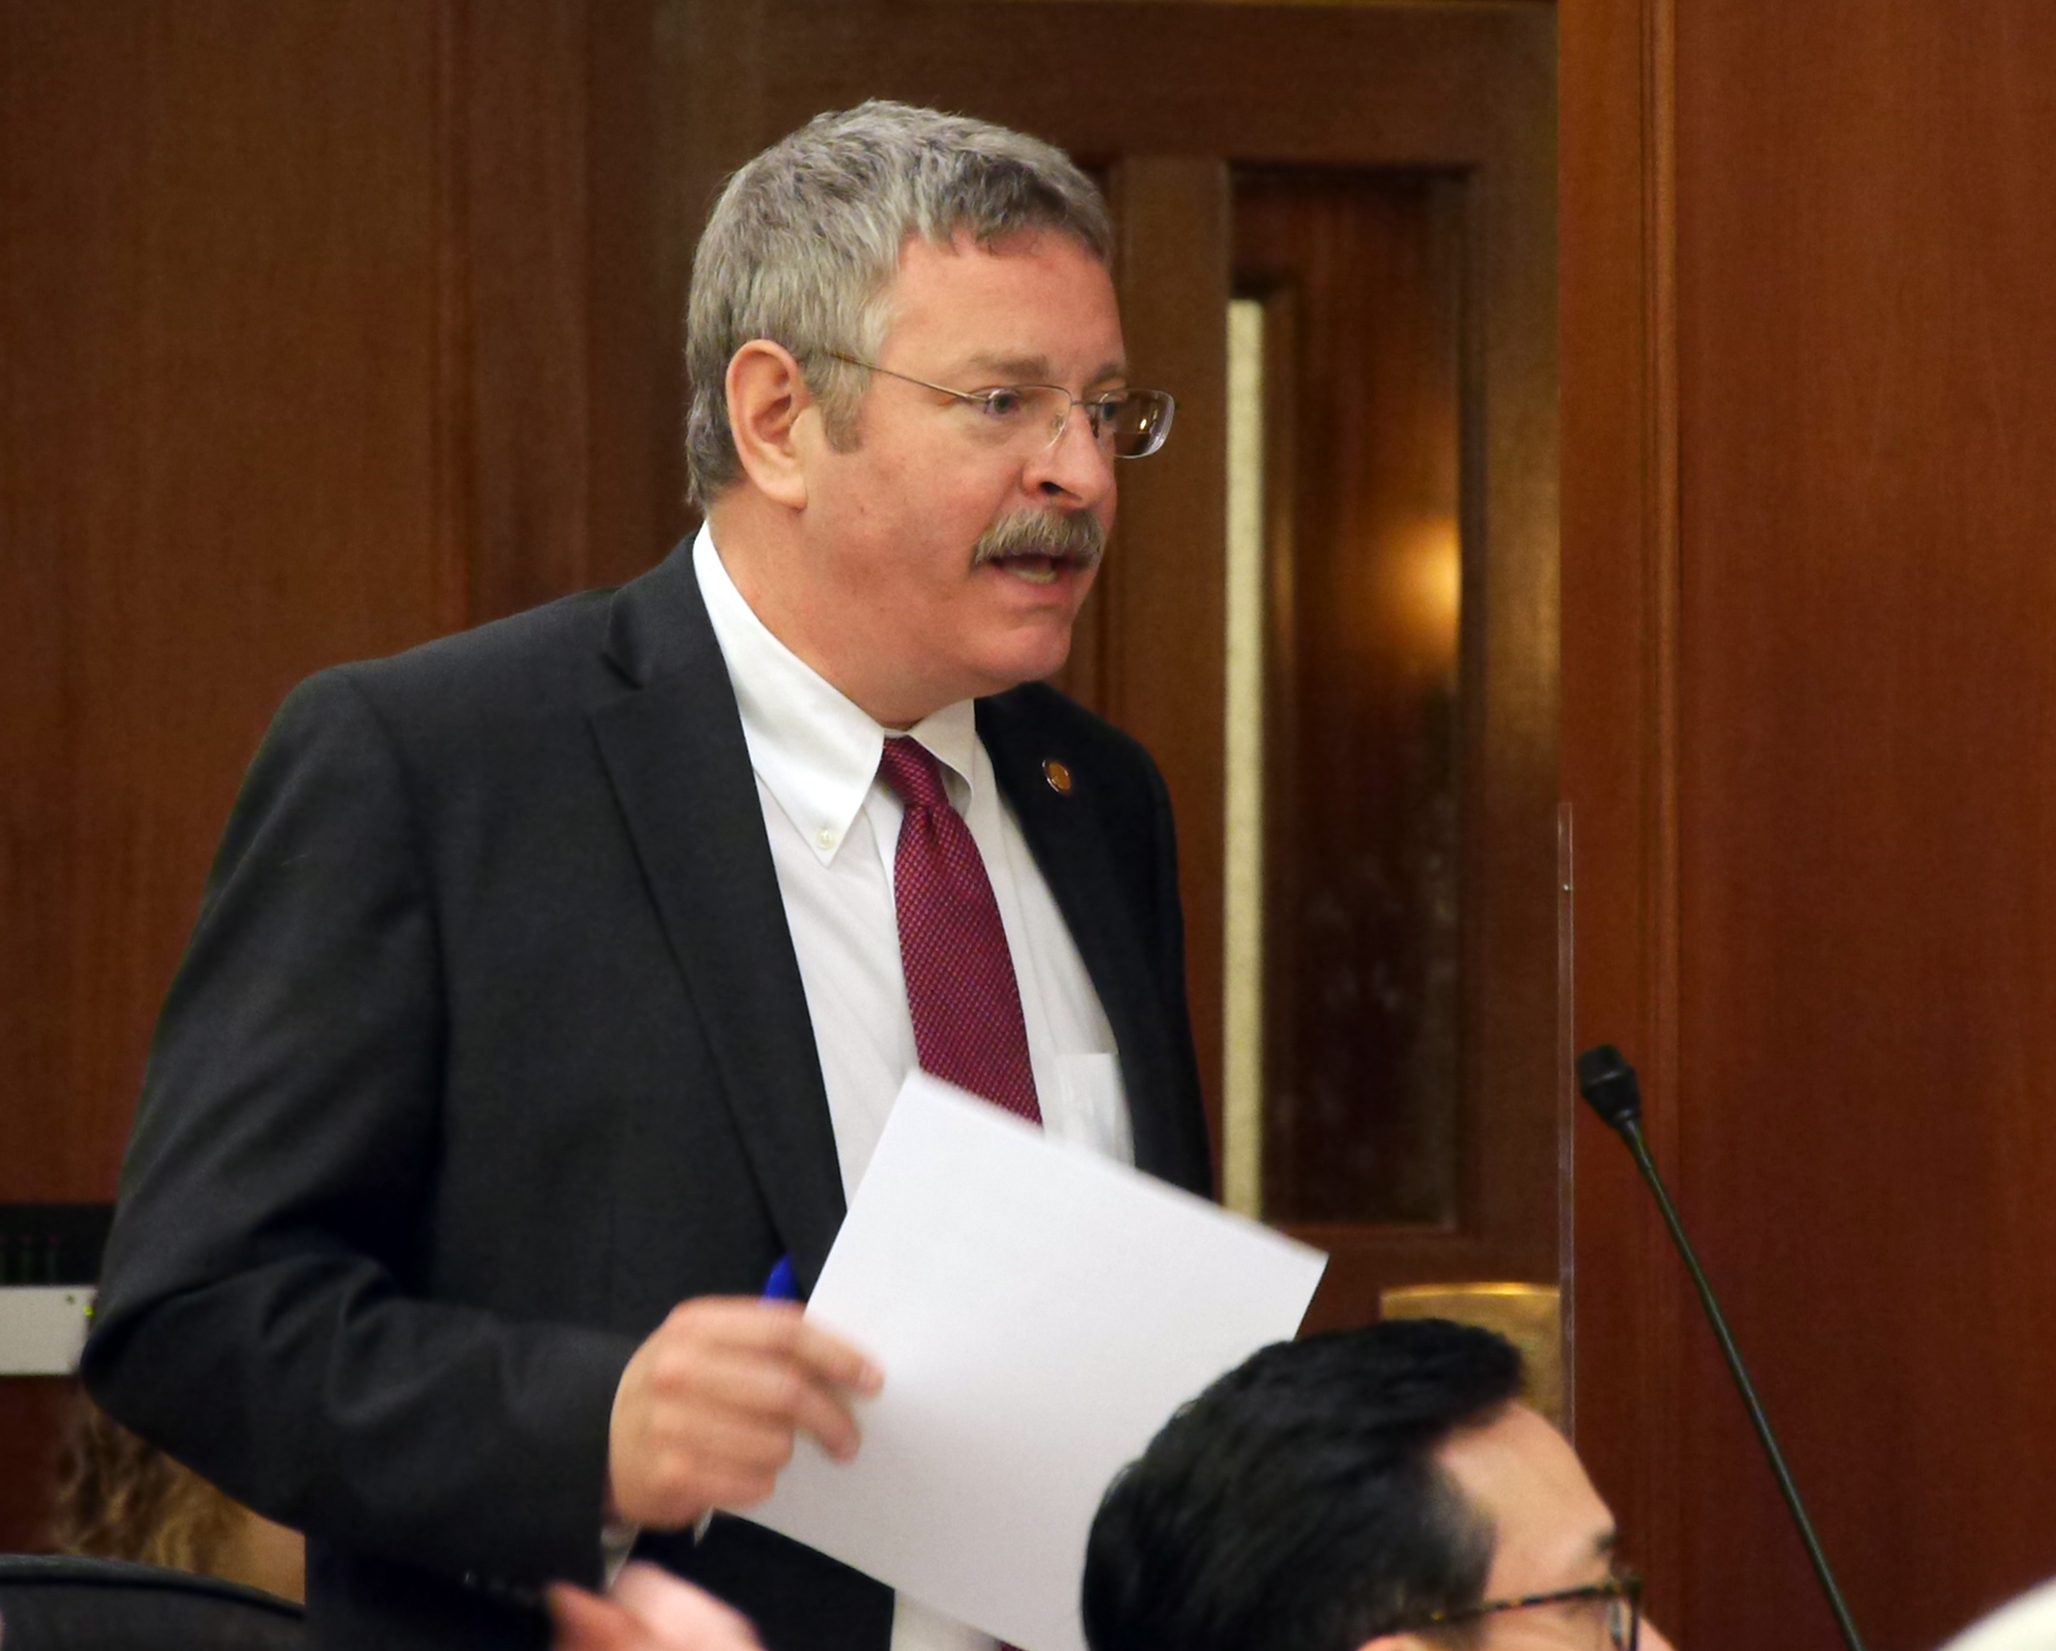 Rep. Dan Saddler, R-Eagle River, discusses the state operating budget on the floor the House of Representatives, March 11, 2016. (Photo by Skip Gray, 360 North)